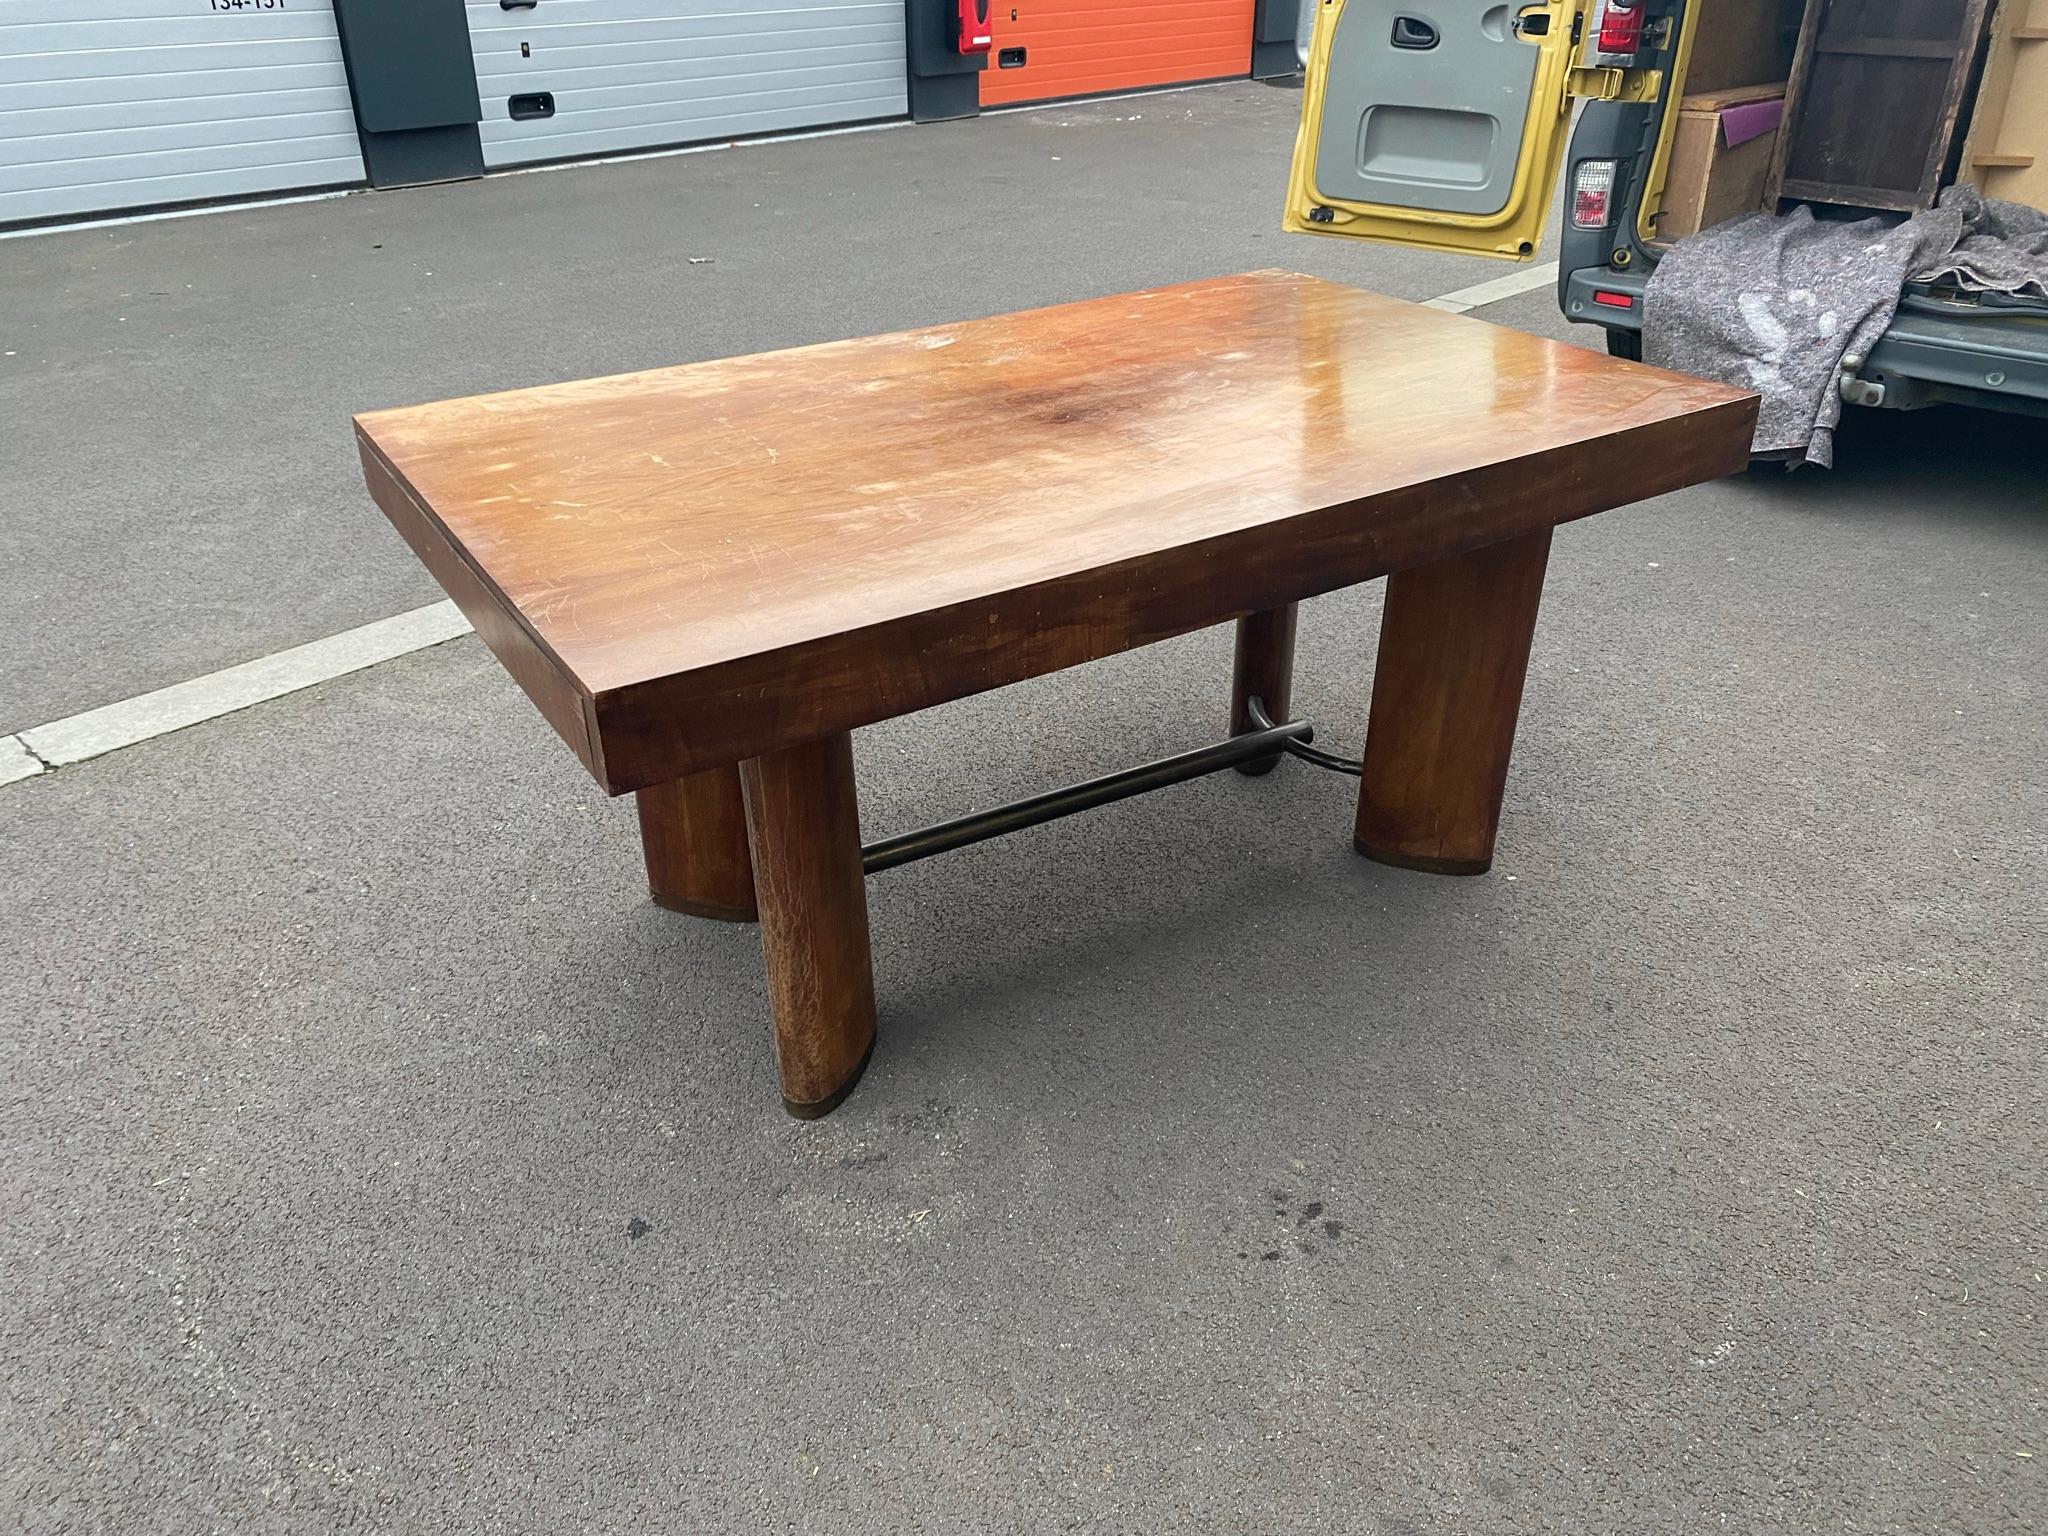 modernist Art Deco desk or table in walnut, metal spacer and shoe, circa 1930 
varnish to redo.
 